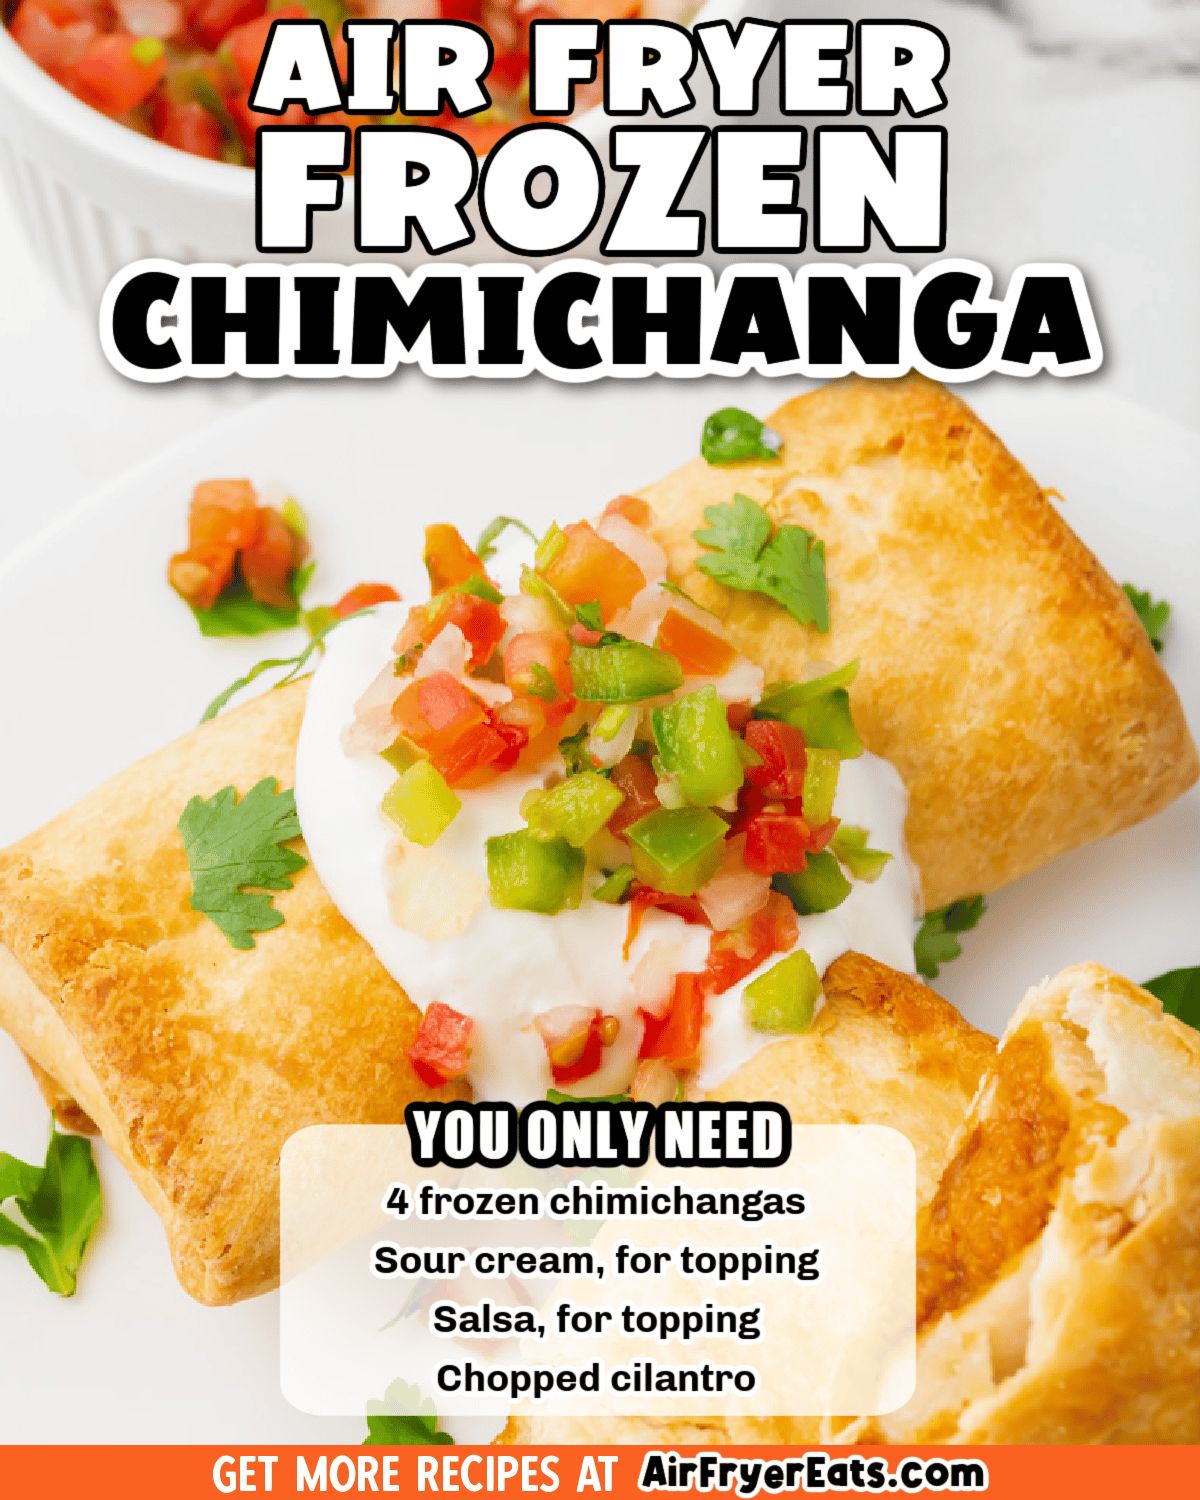 Use your favorite countertop appliance to make an Air Fryer Chimichanga that is hot, crispy, and ready so much quicker than in the oven! via @vegetarianmamma